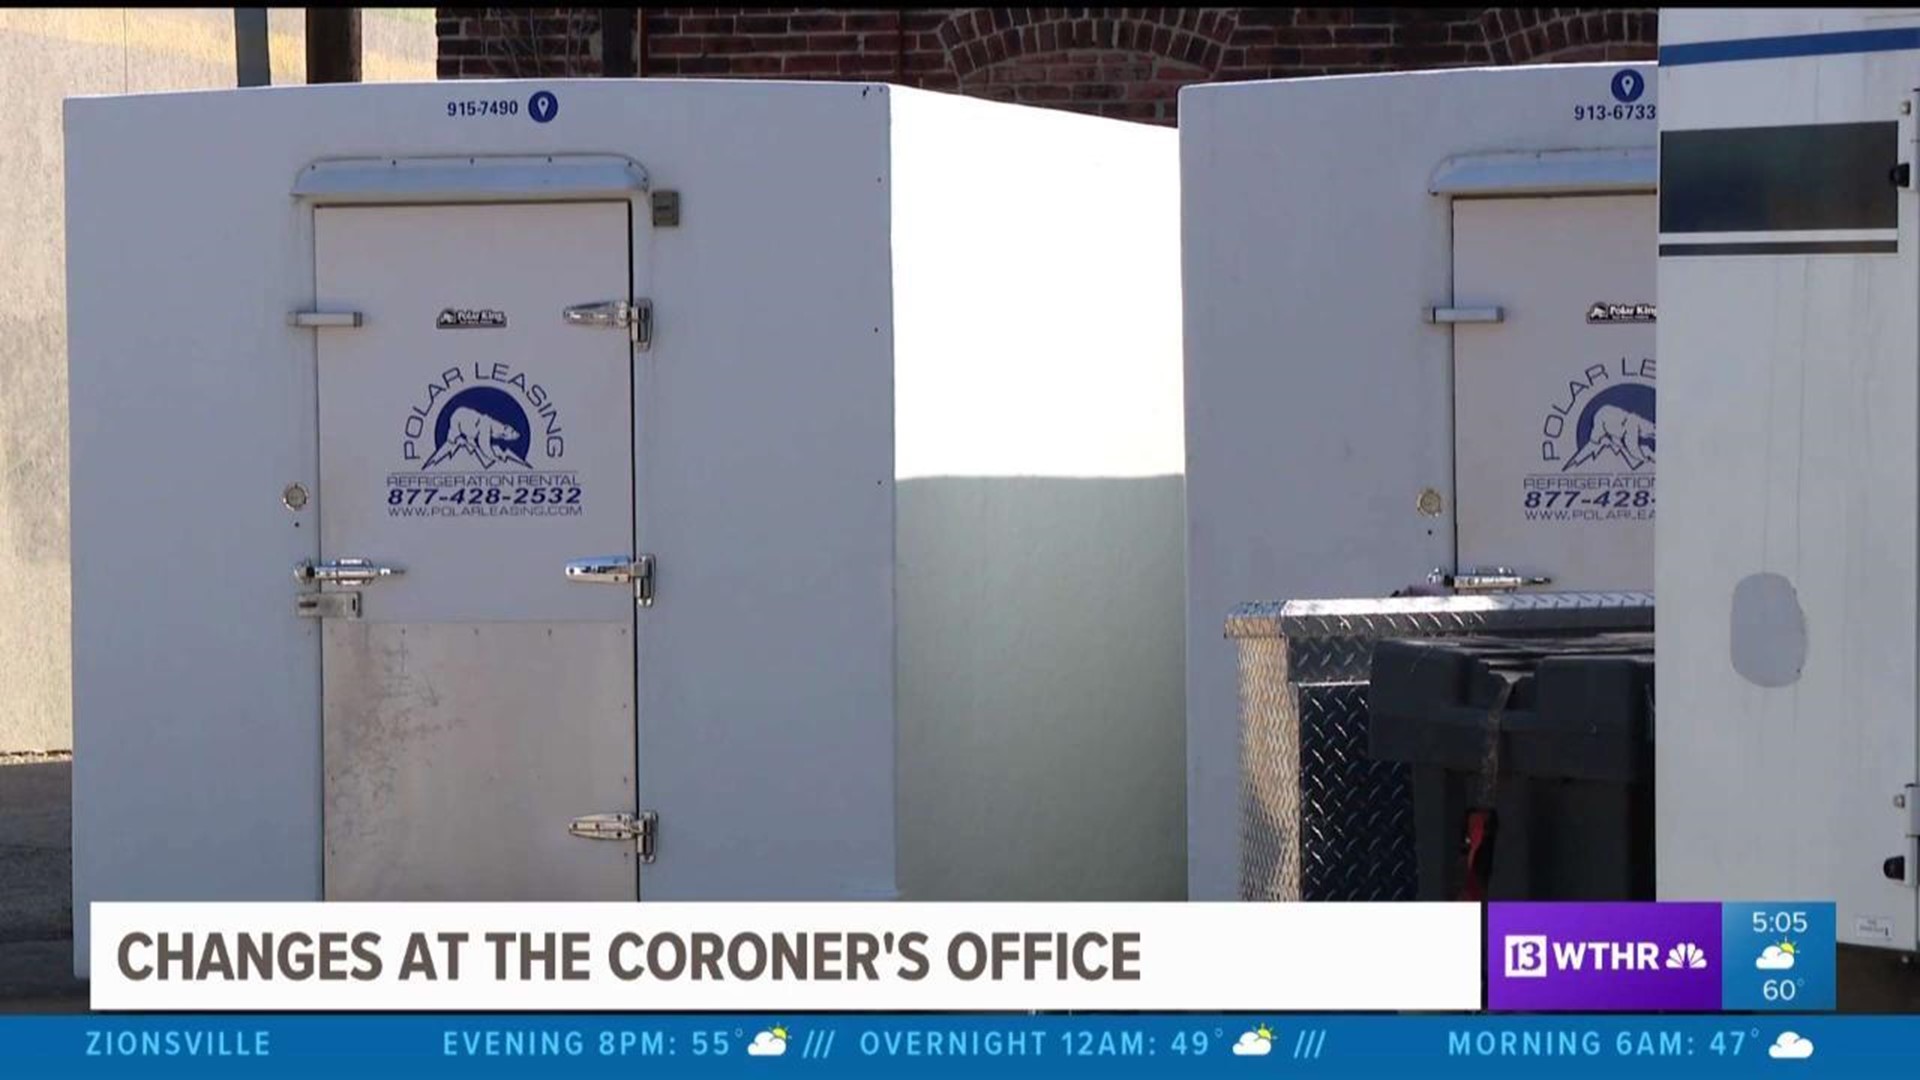 Changes at coroner's office